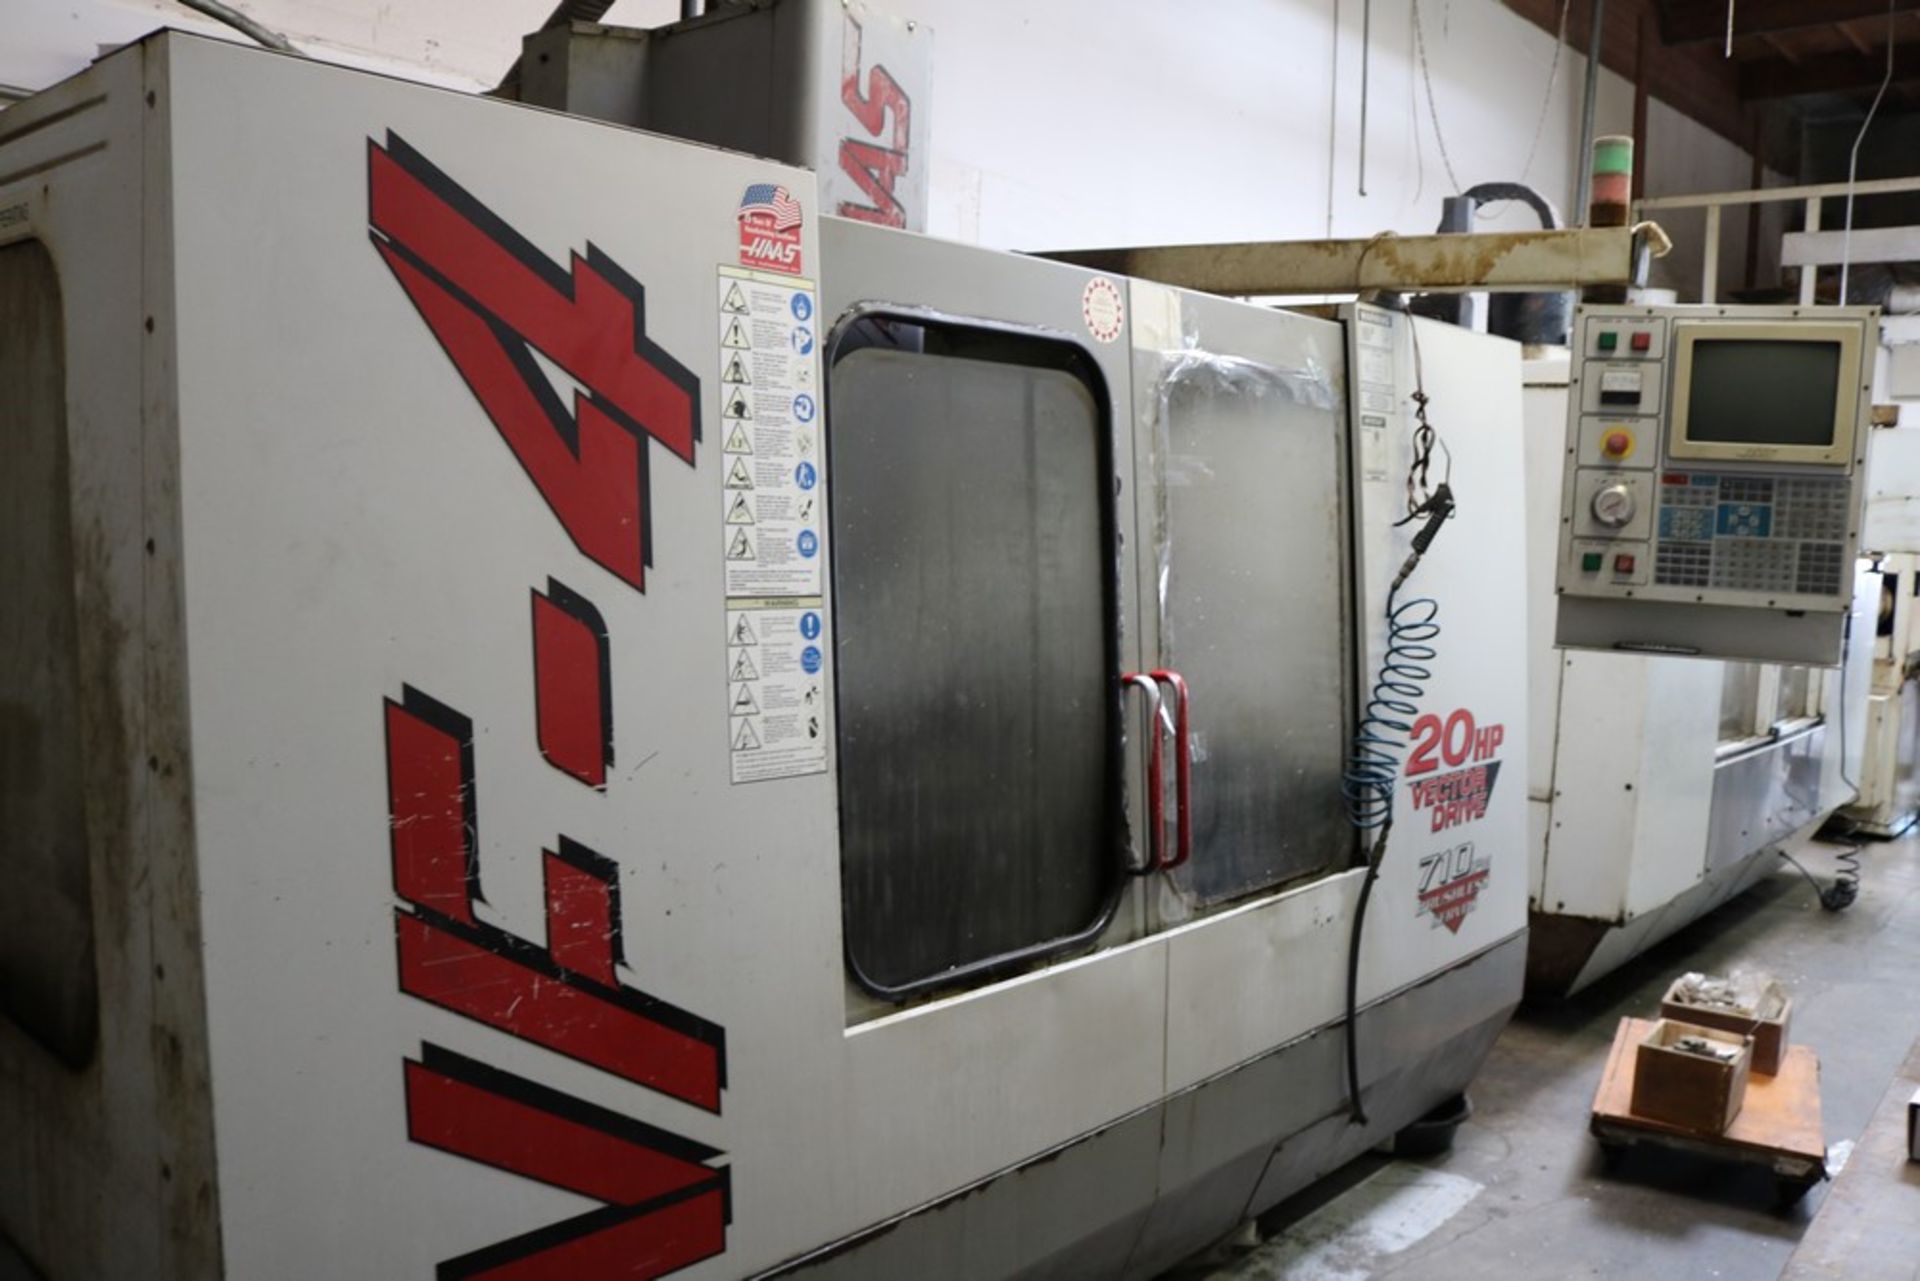 1999 Haas VF-4, 20 Station Umbrella Type Tool Changer, BT-40, Haas Control, 20HP, Chip Auger (